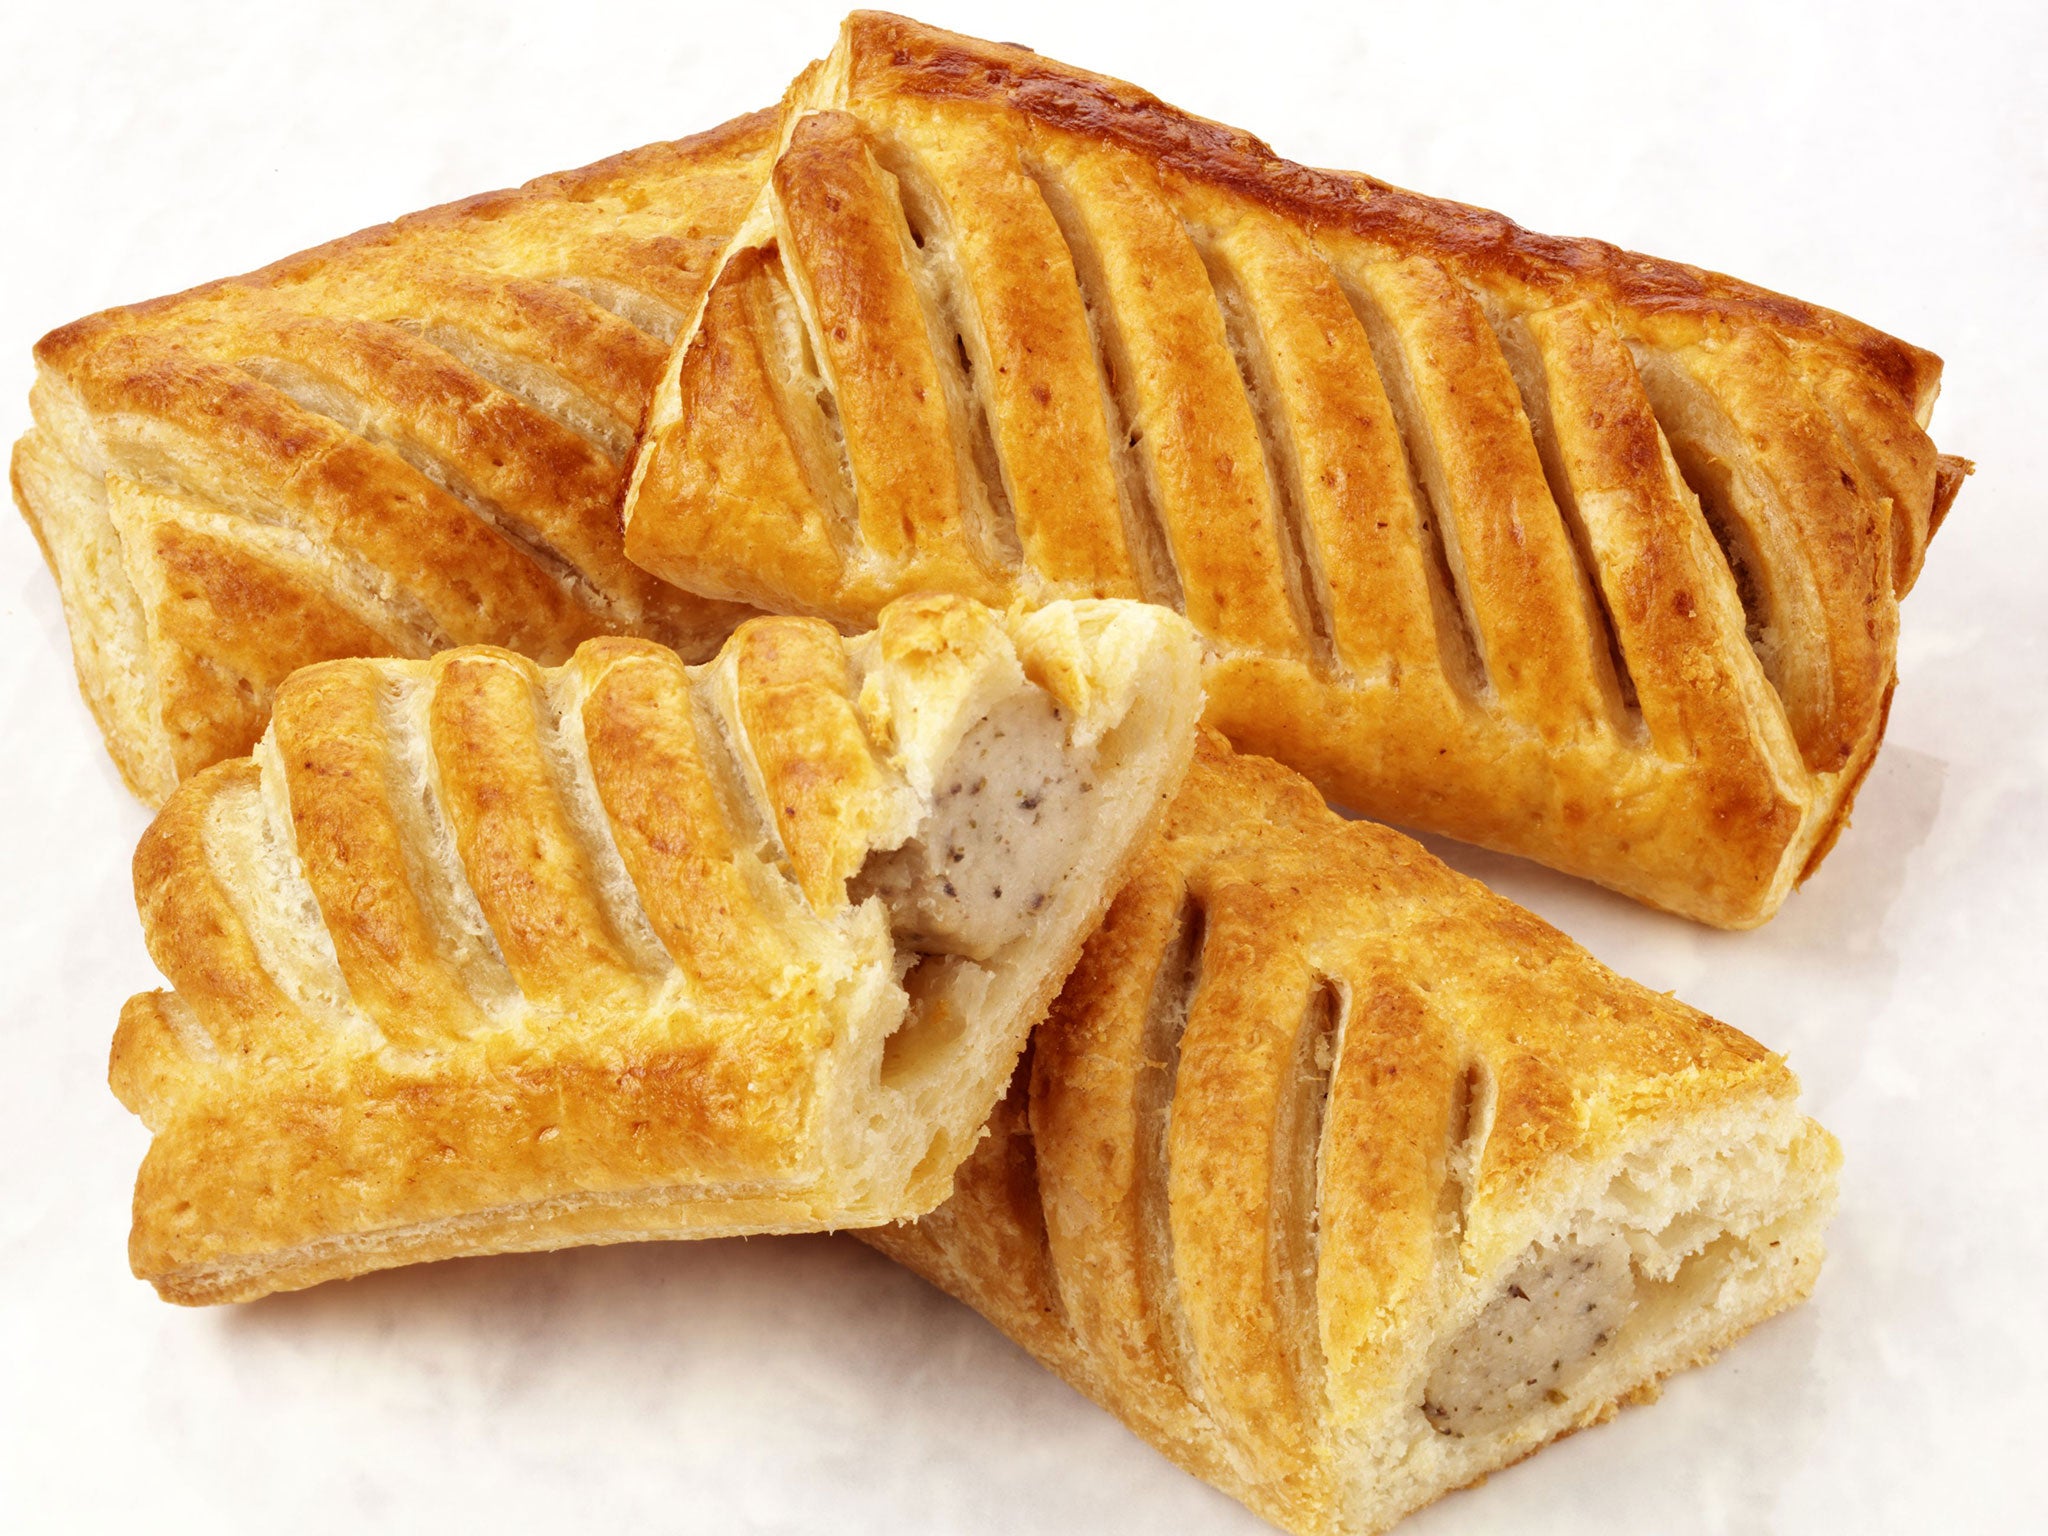 Kim Rose has been reported to police over allegations of 'treating' after handing out sausage rolls